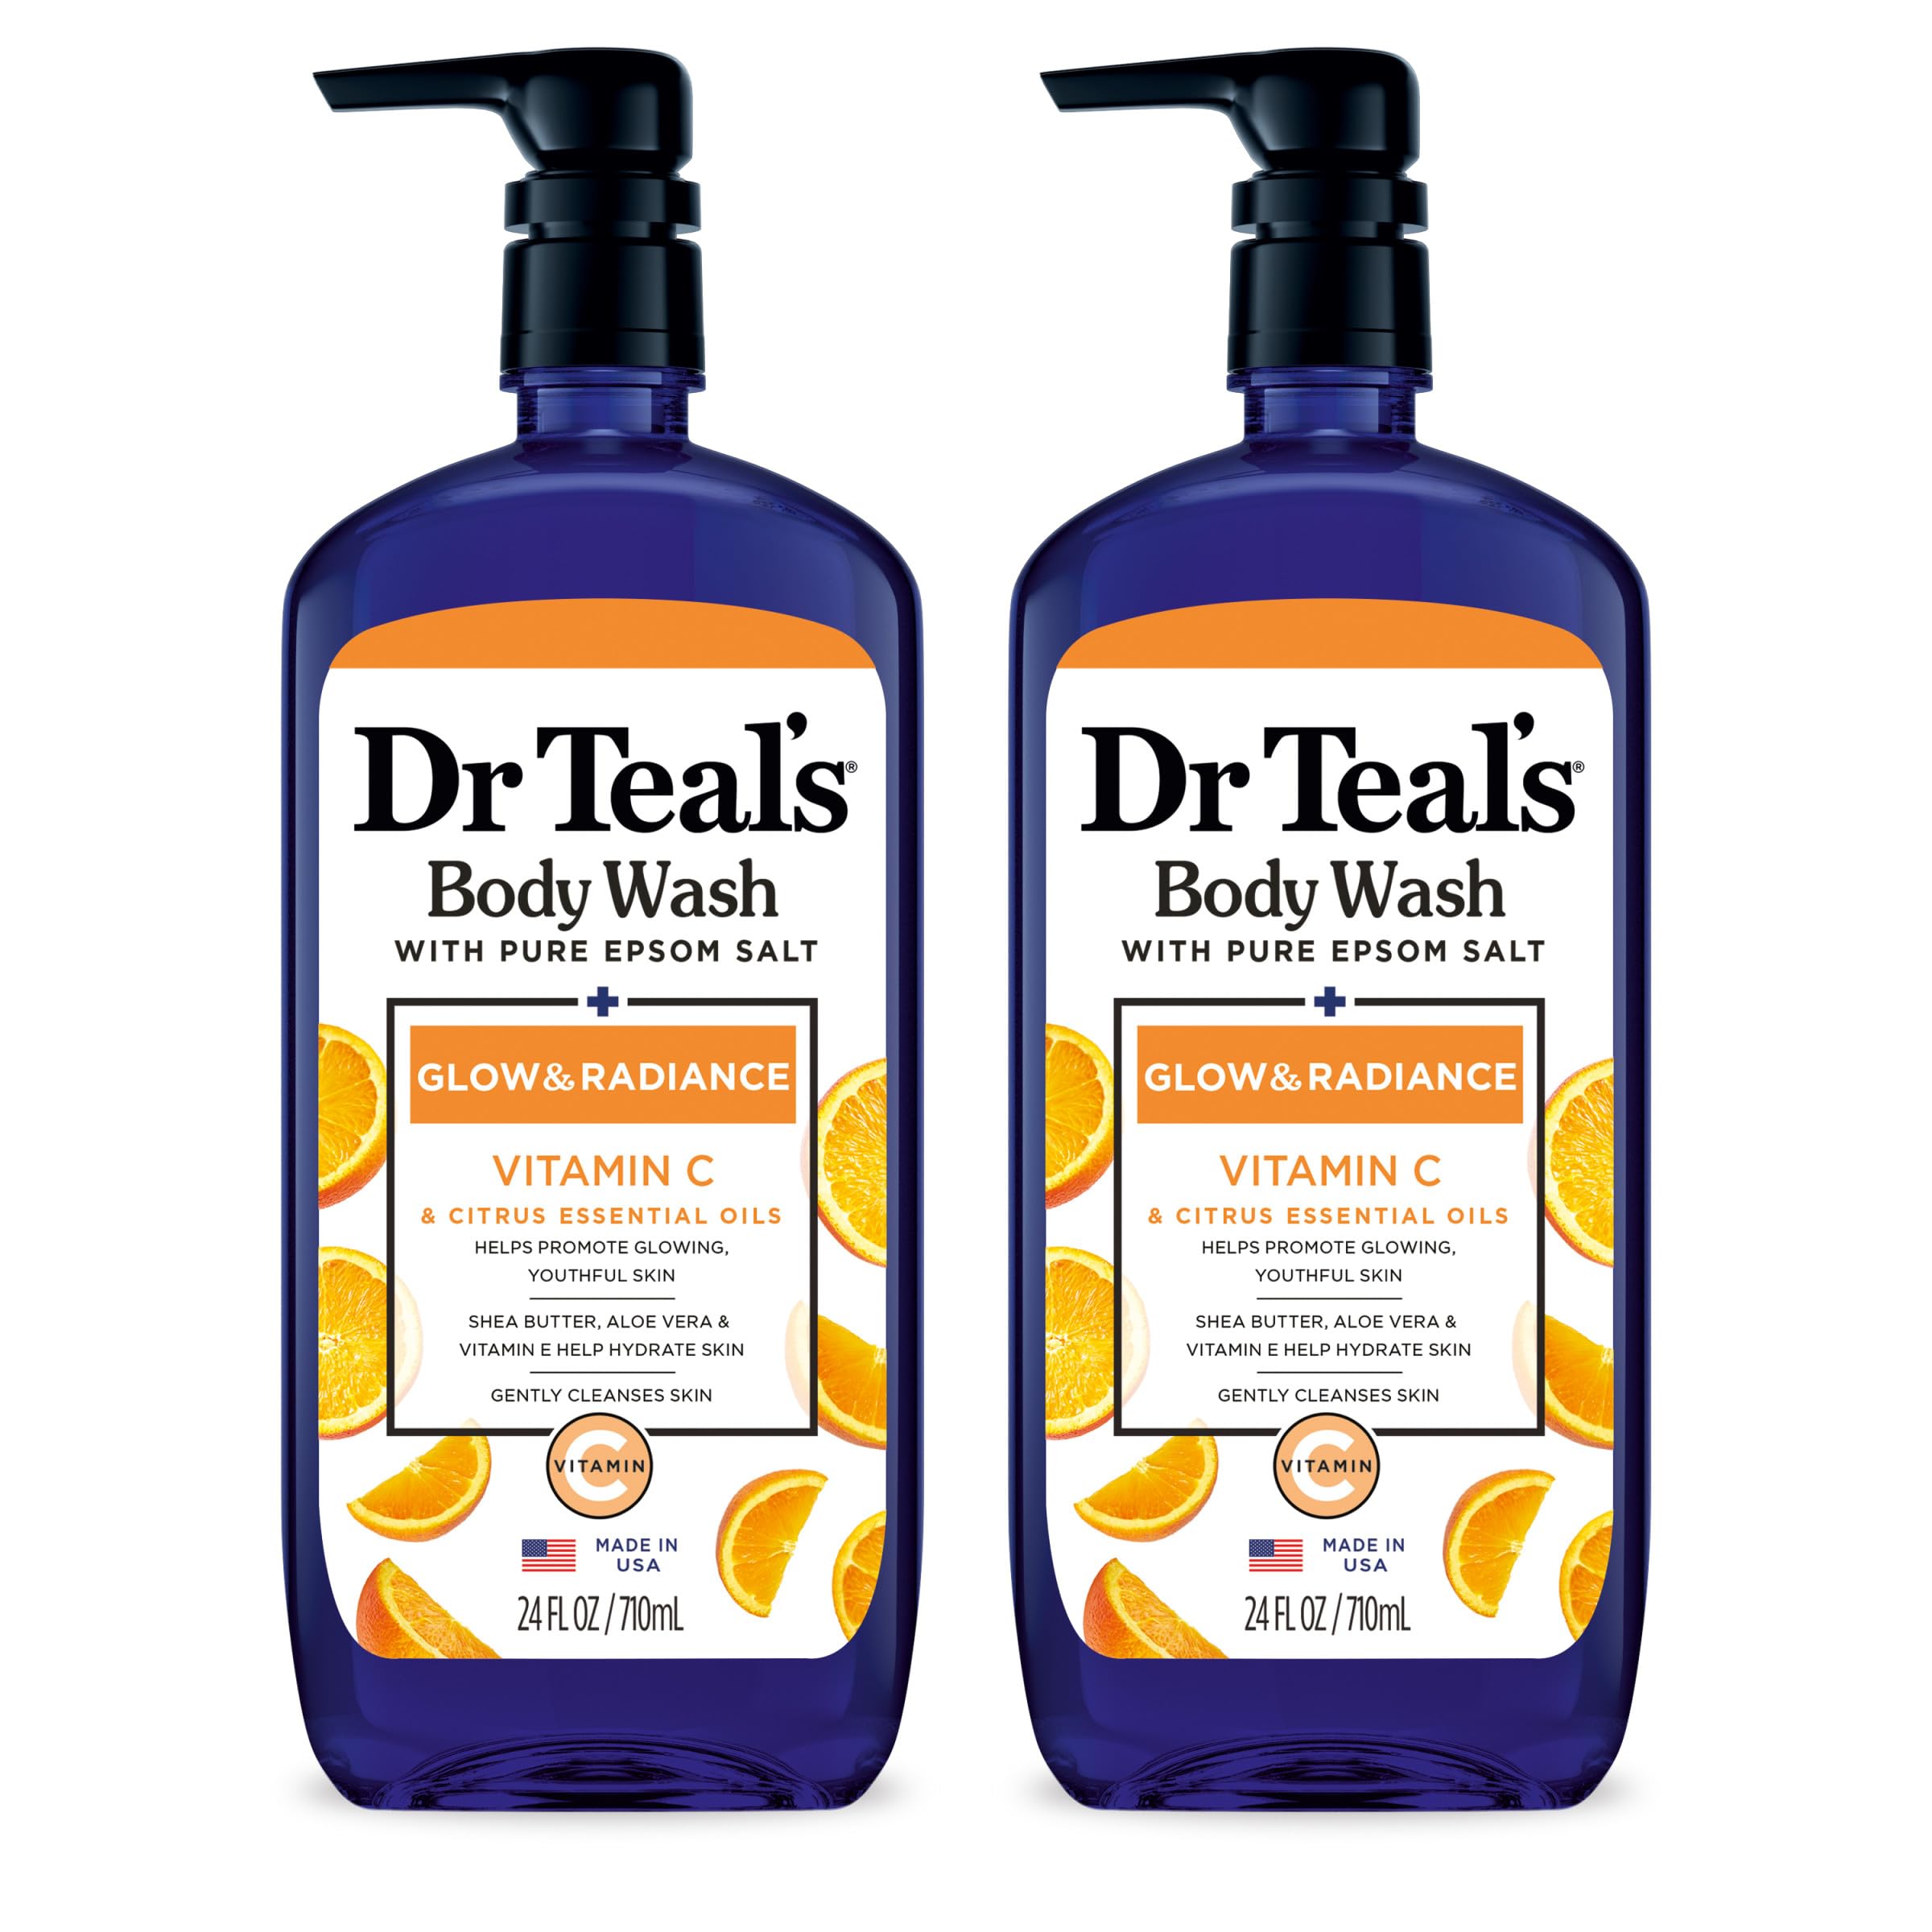 Dr. Teal's Body Wash with Pure Epsom Salt, Glow & Radiance with Vitamin C & Citrus Essential Oils, 24 Fl oz (Pack of 2)